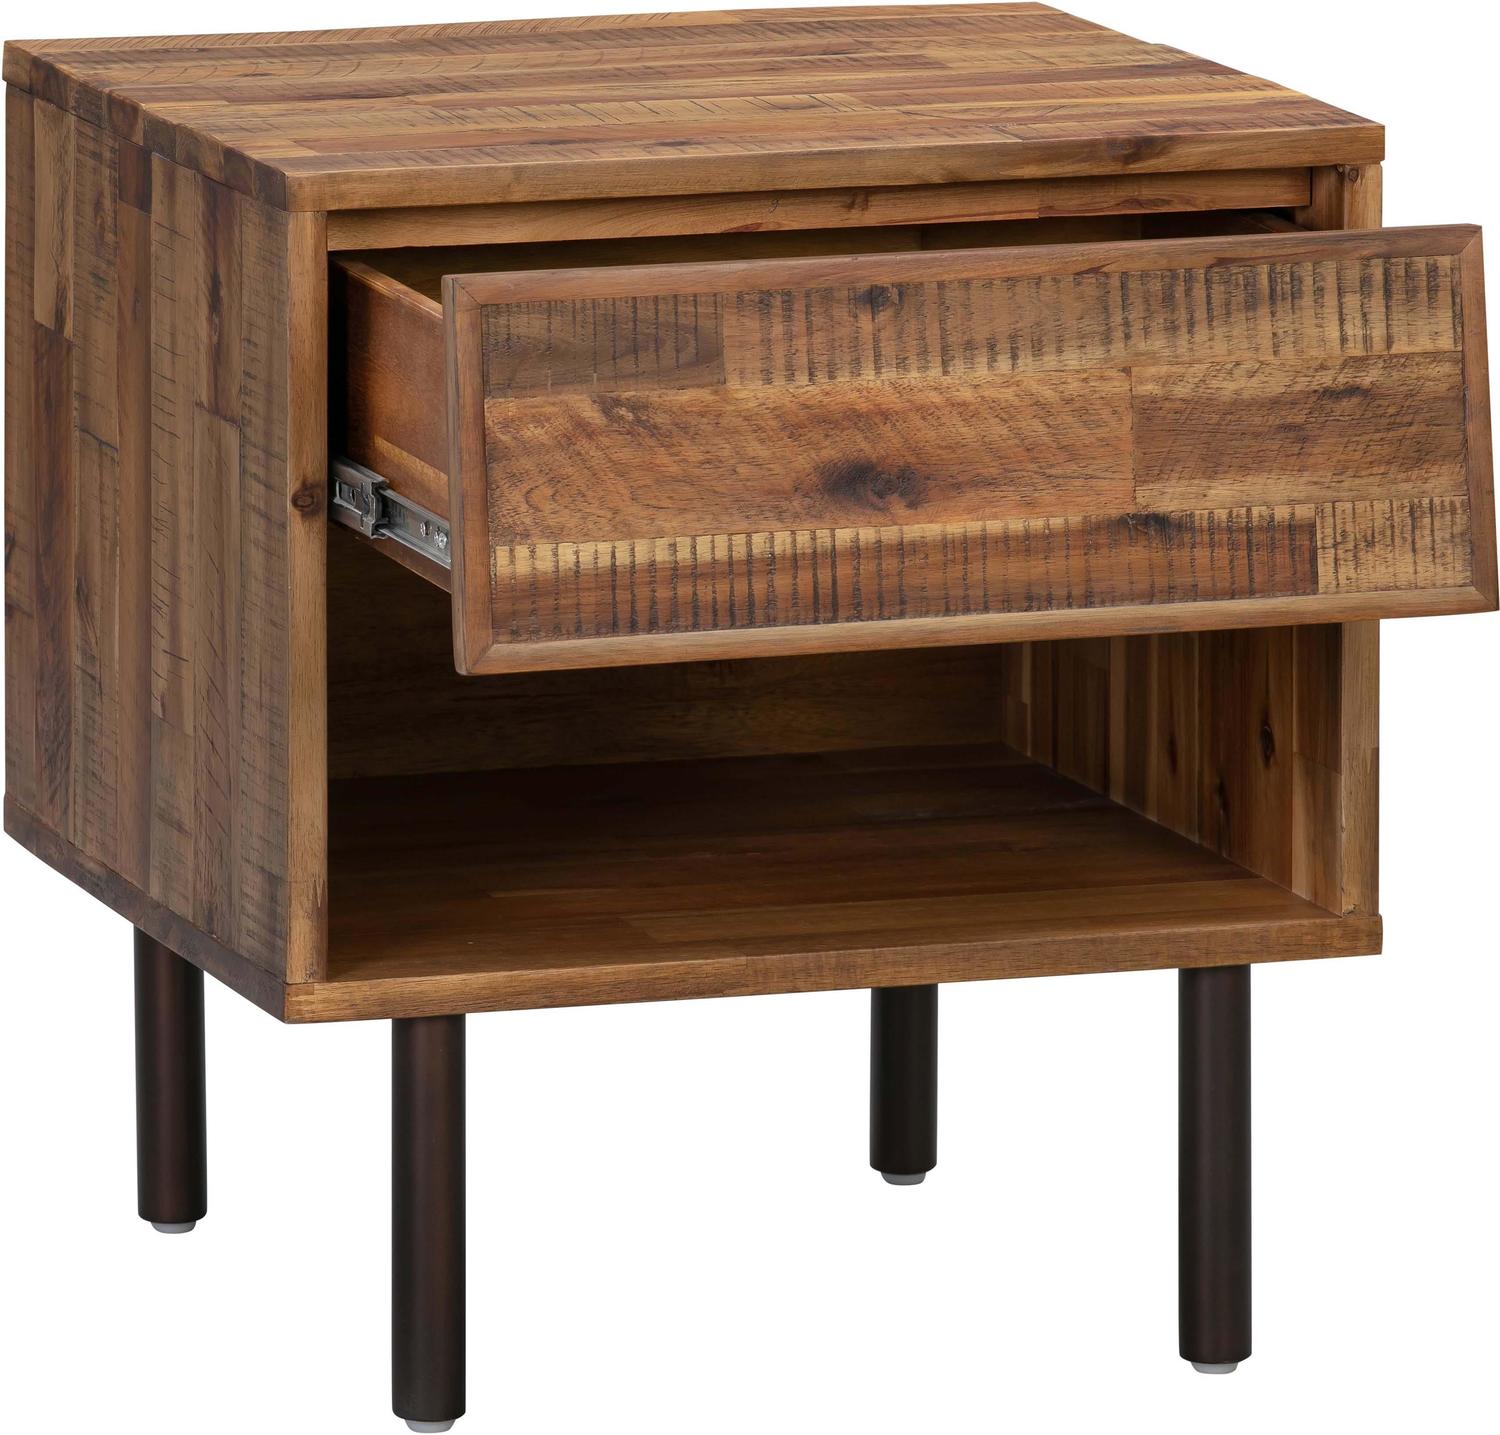 double drawer nightstand Tov Furniture Nightstands Rustic Acacia